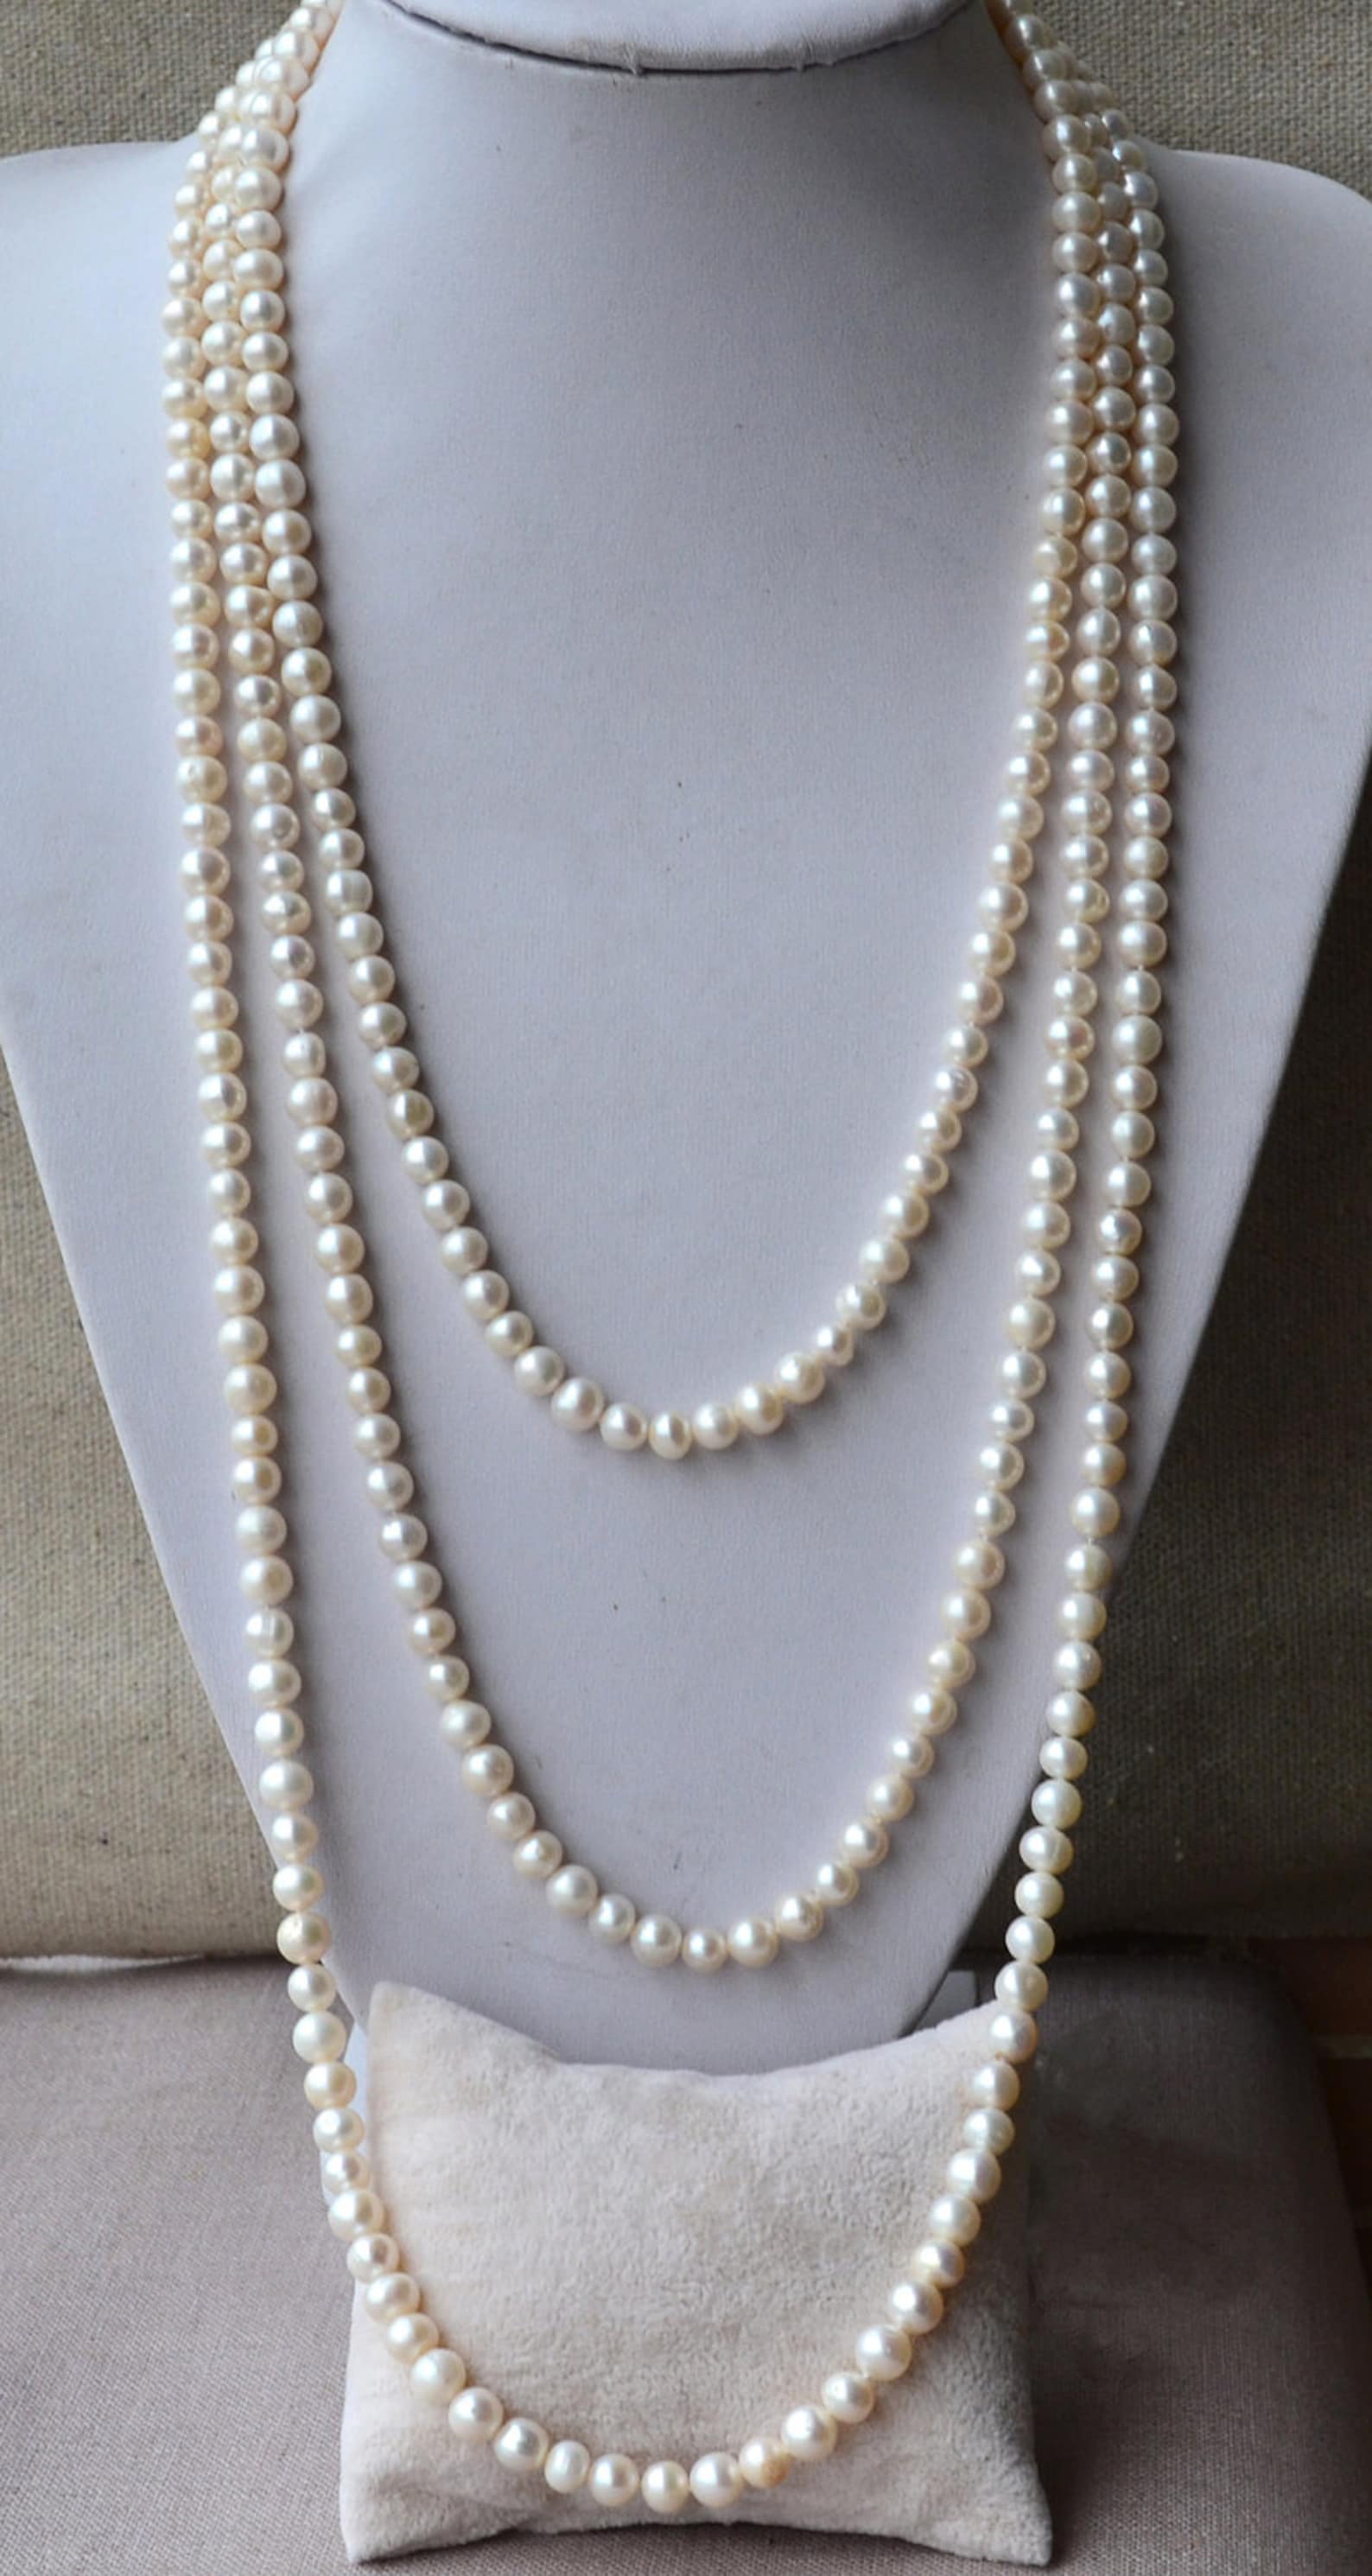 Long Pearl Necklace 90 Inches 7-8mm White Freshwater Pearl - Etsy